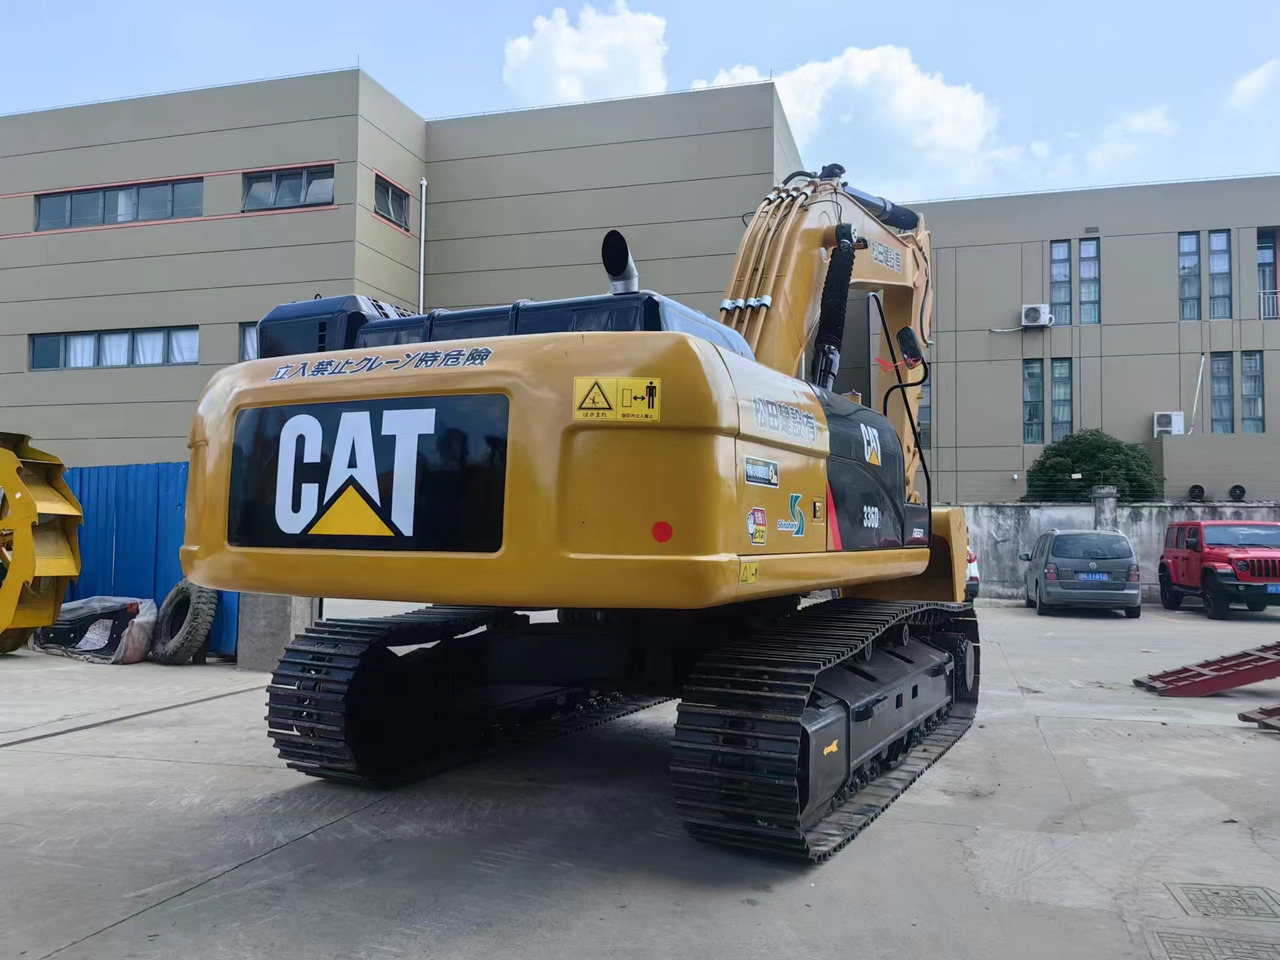 Crawler excavator 95%new Original Japan made CATERPILLAR Cat 336D2, Large engineering construction machinery good condition in stock hot selling !!!: picture 8